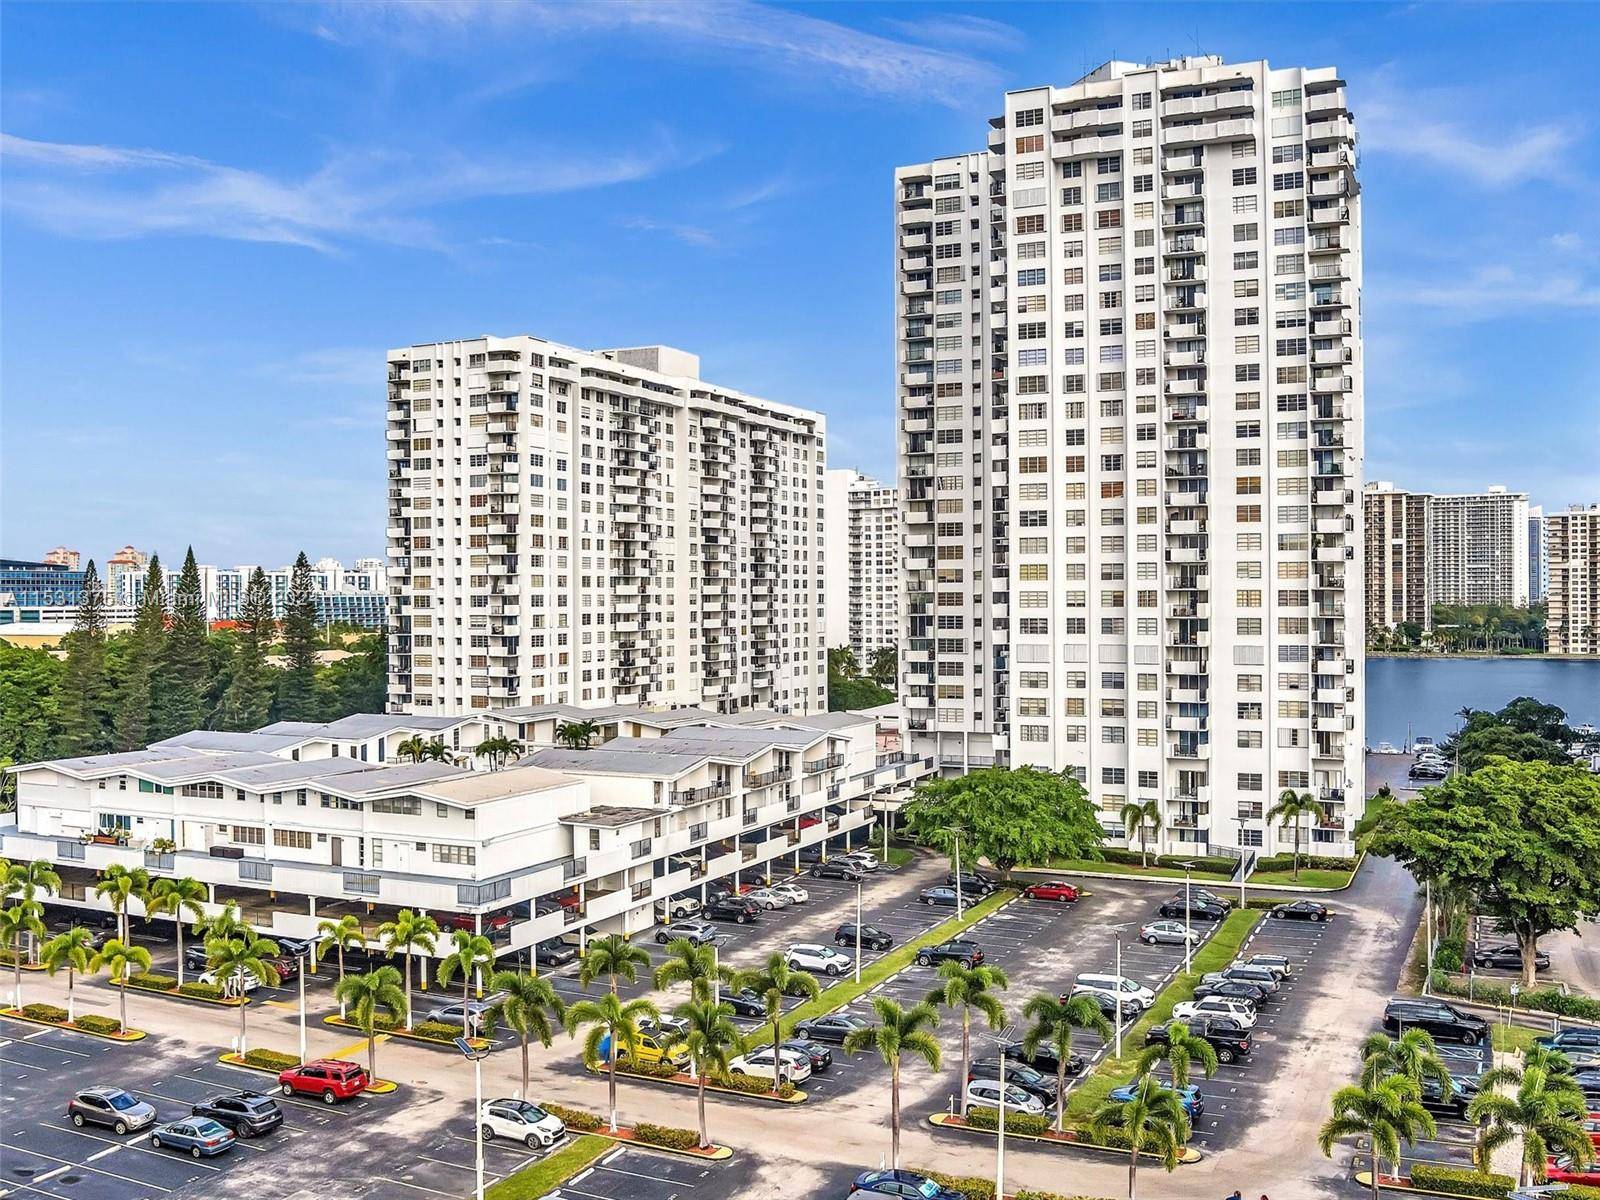 New to the market ! This spacious and updated 2 2 is located in the heart of Aventura !